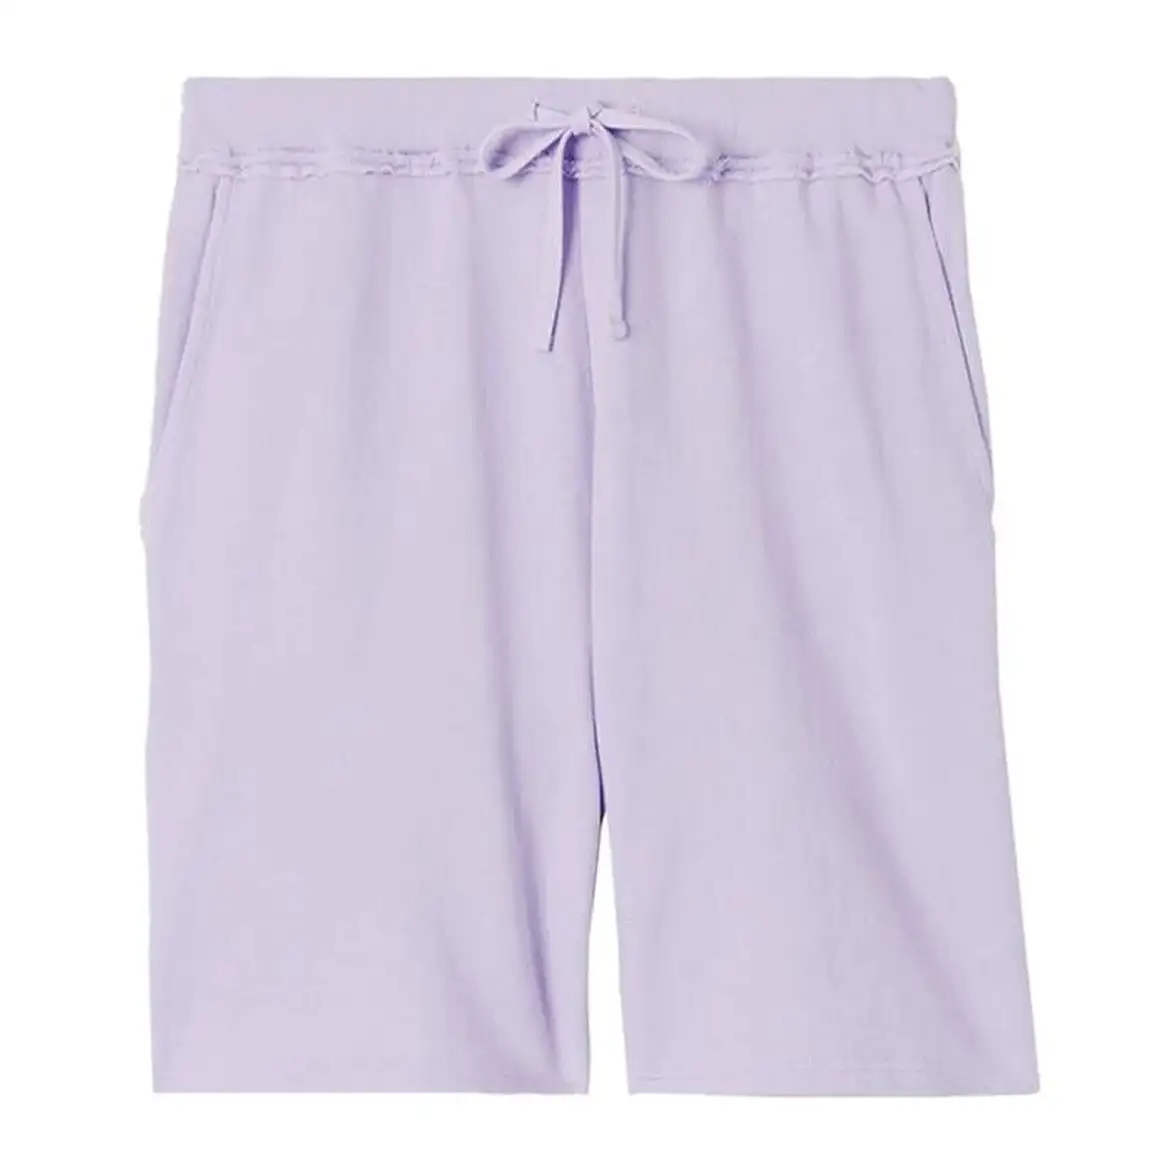 Eileen Fisher Midthigh Shorts with Drawstring in Puckered Organic